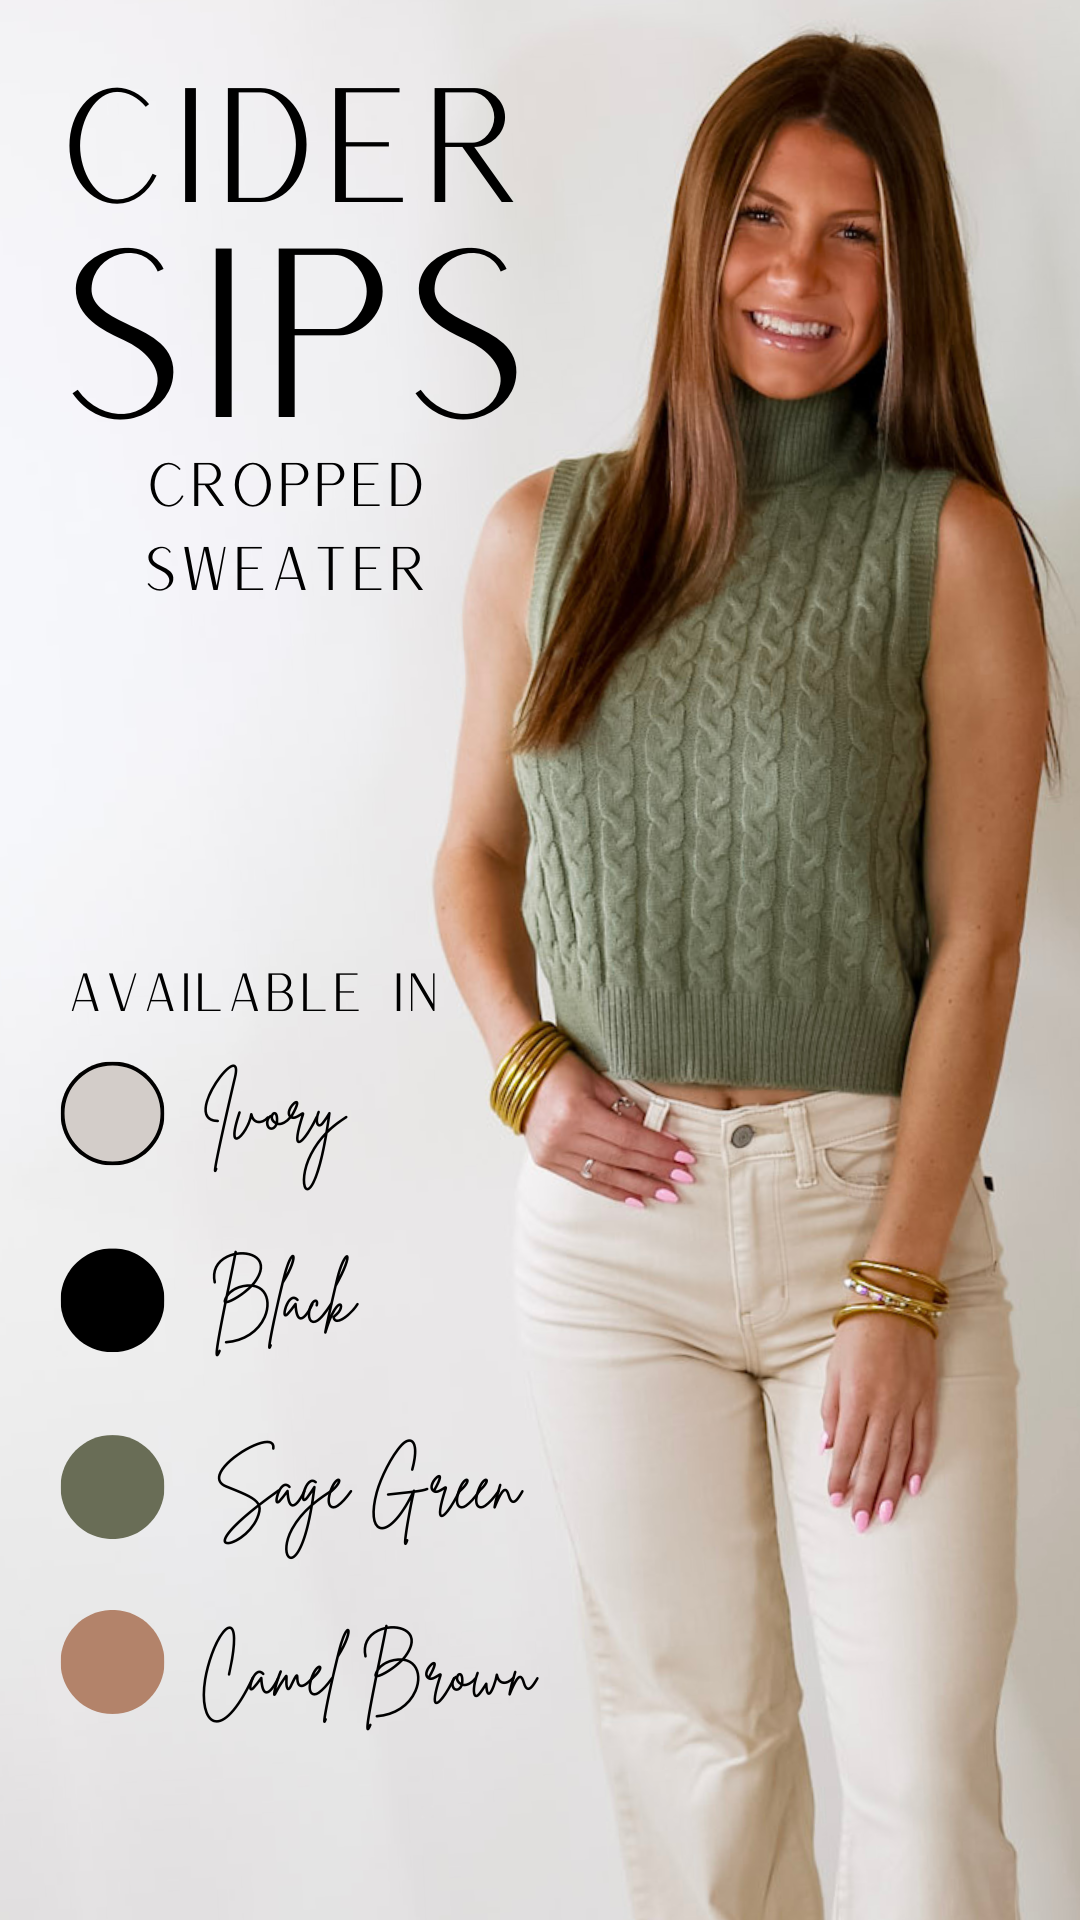 Cider Sips Cropped Sweater Tank Top with High Neck in Sage Green - Giddy Up Glamour Boutique